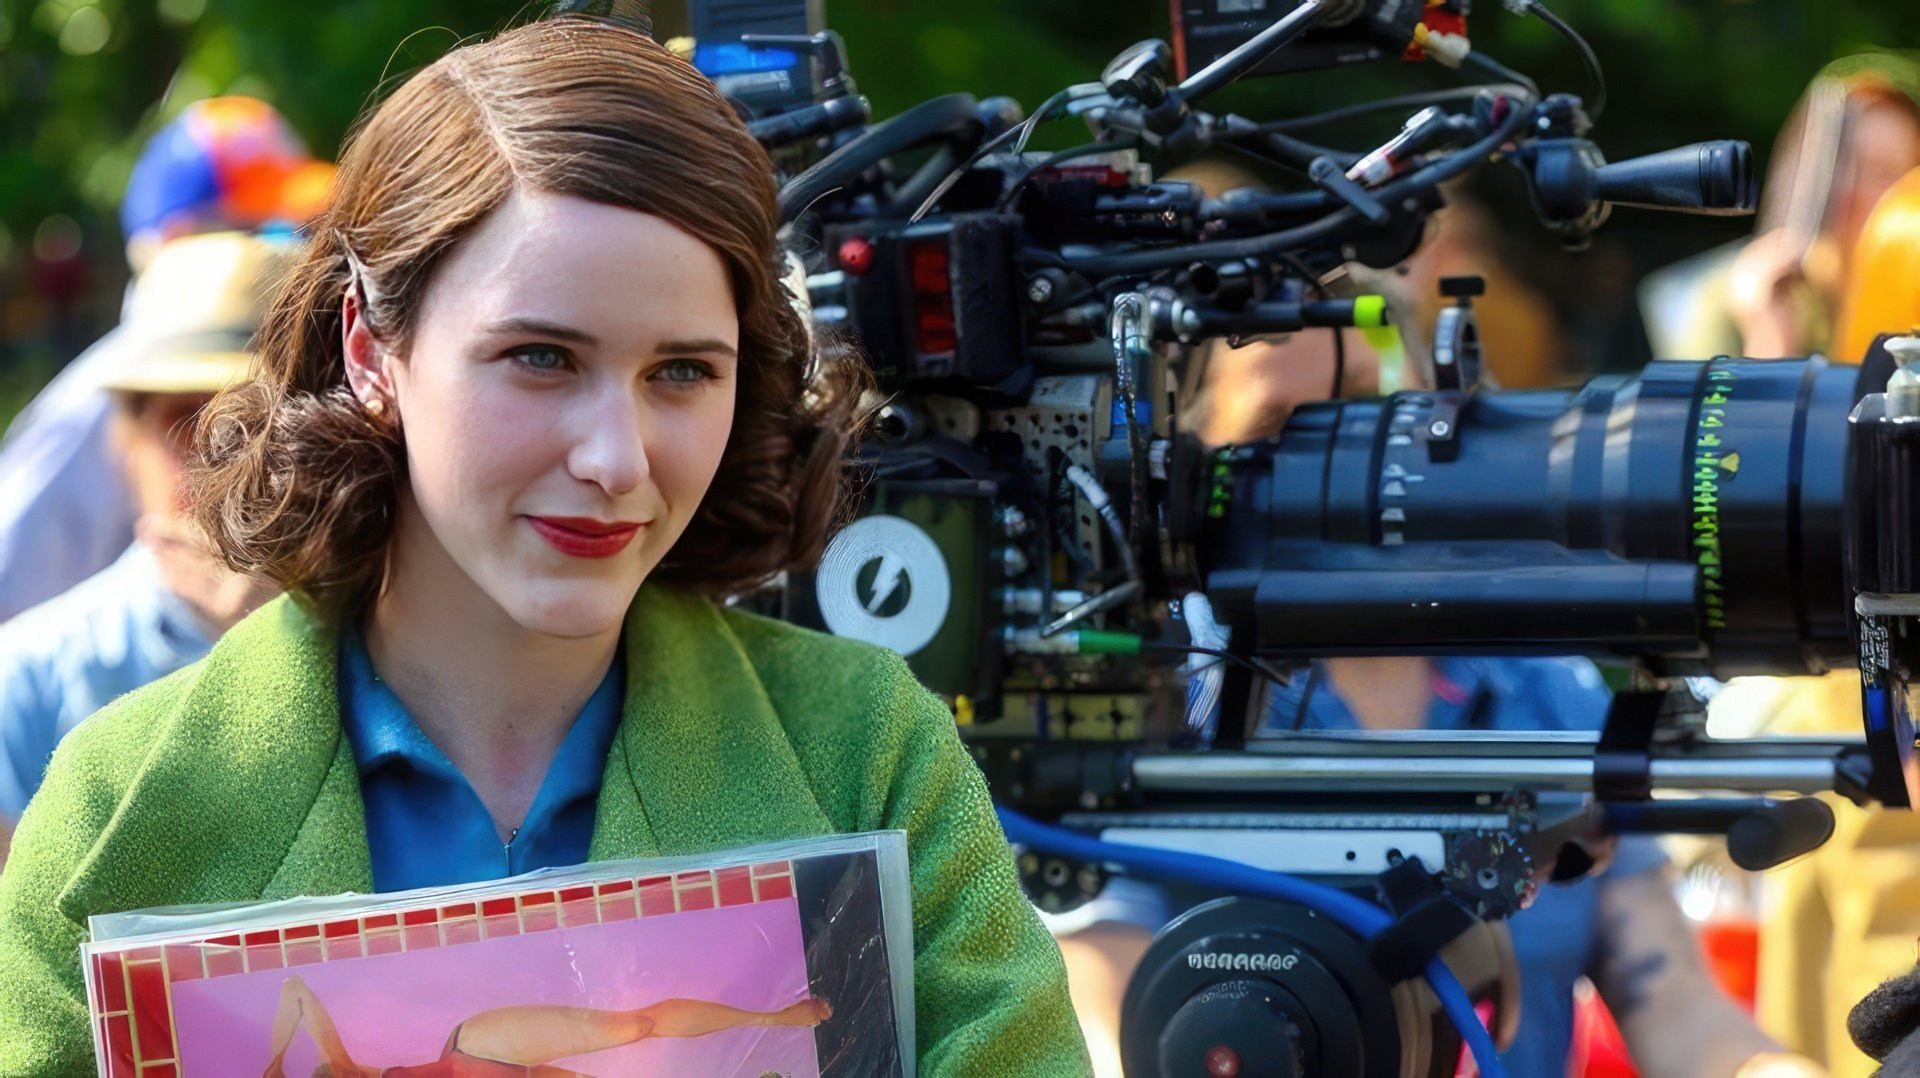 On the set of The Marvelous Mrs. Maisel